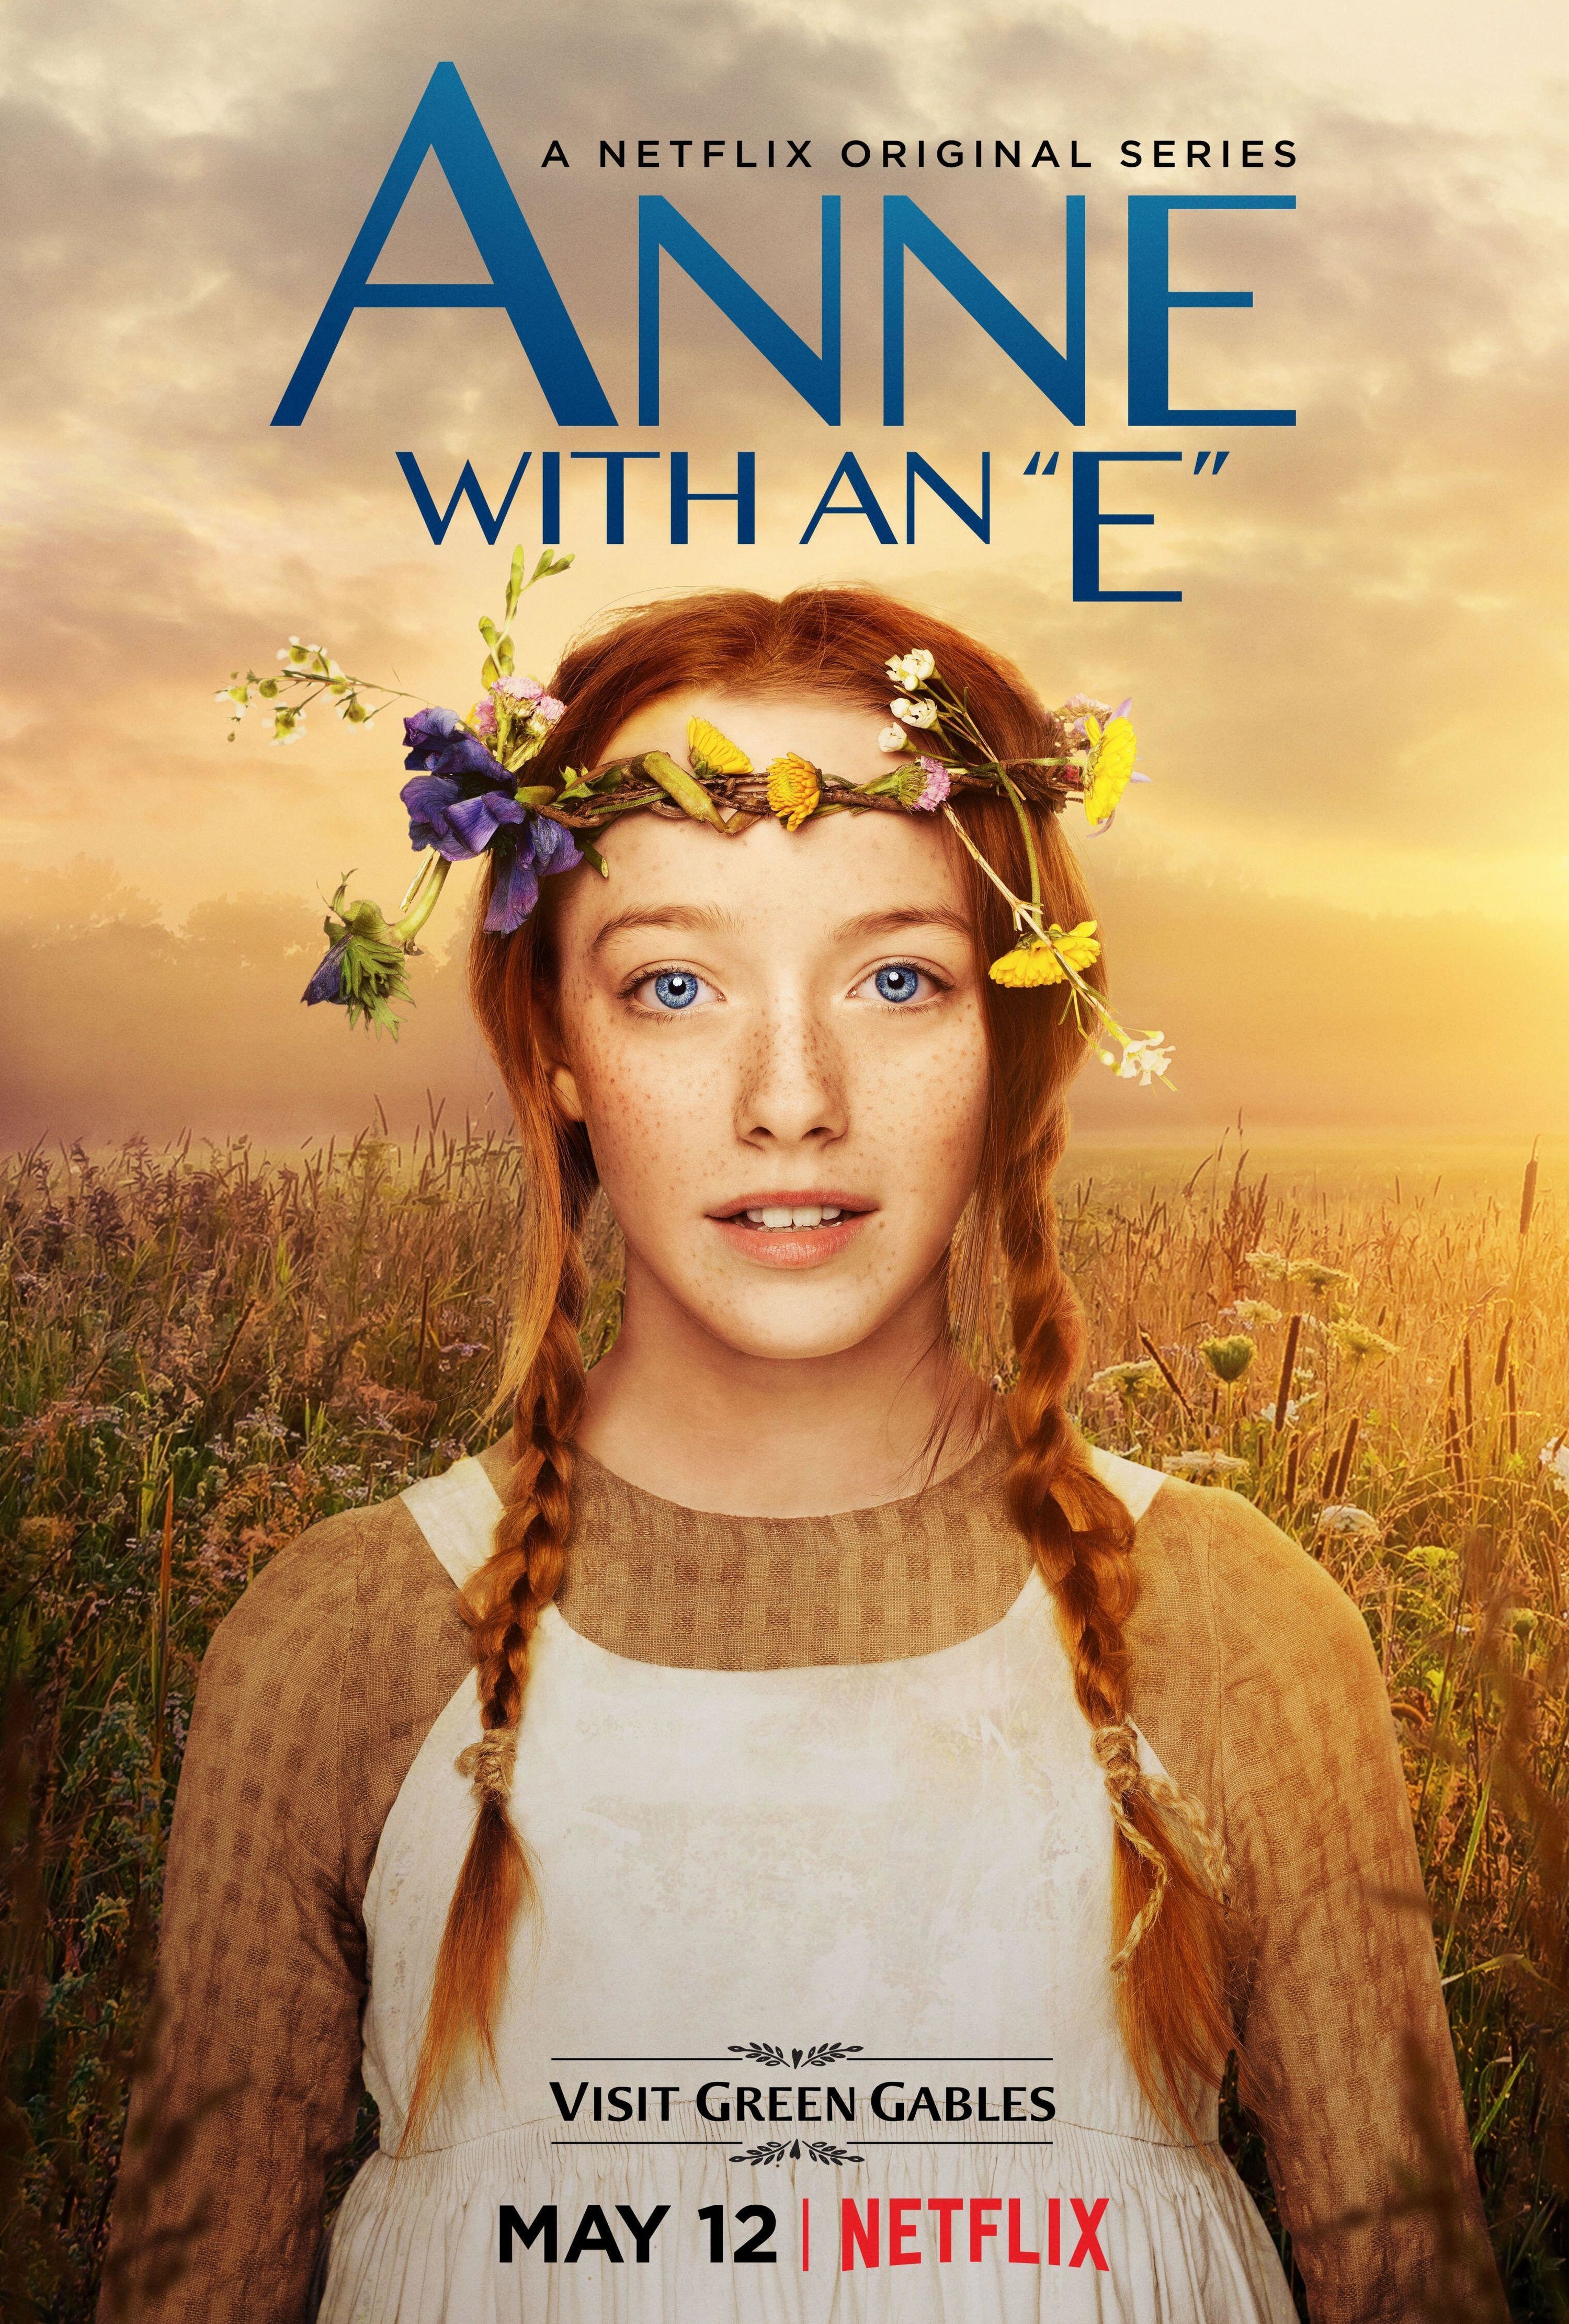 TV show poster includes title character Anne with flowers in her hair and title text in blue above